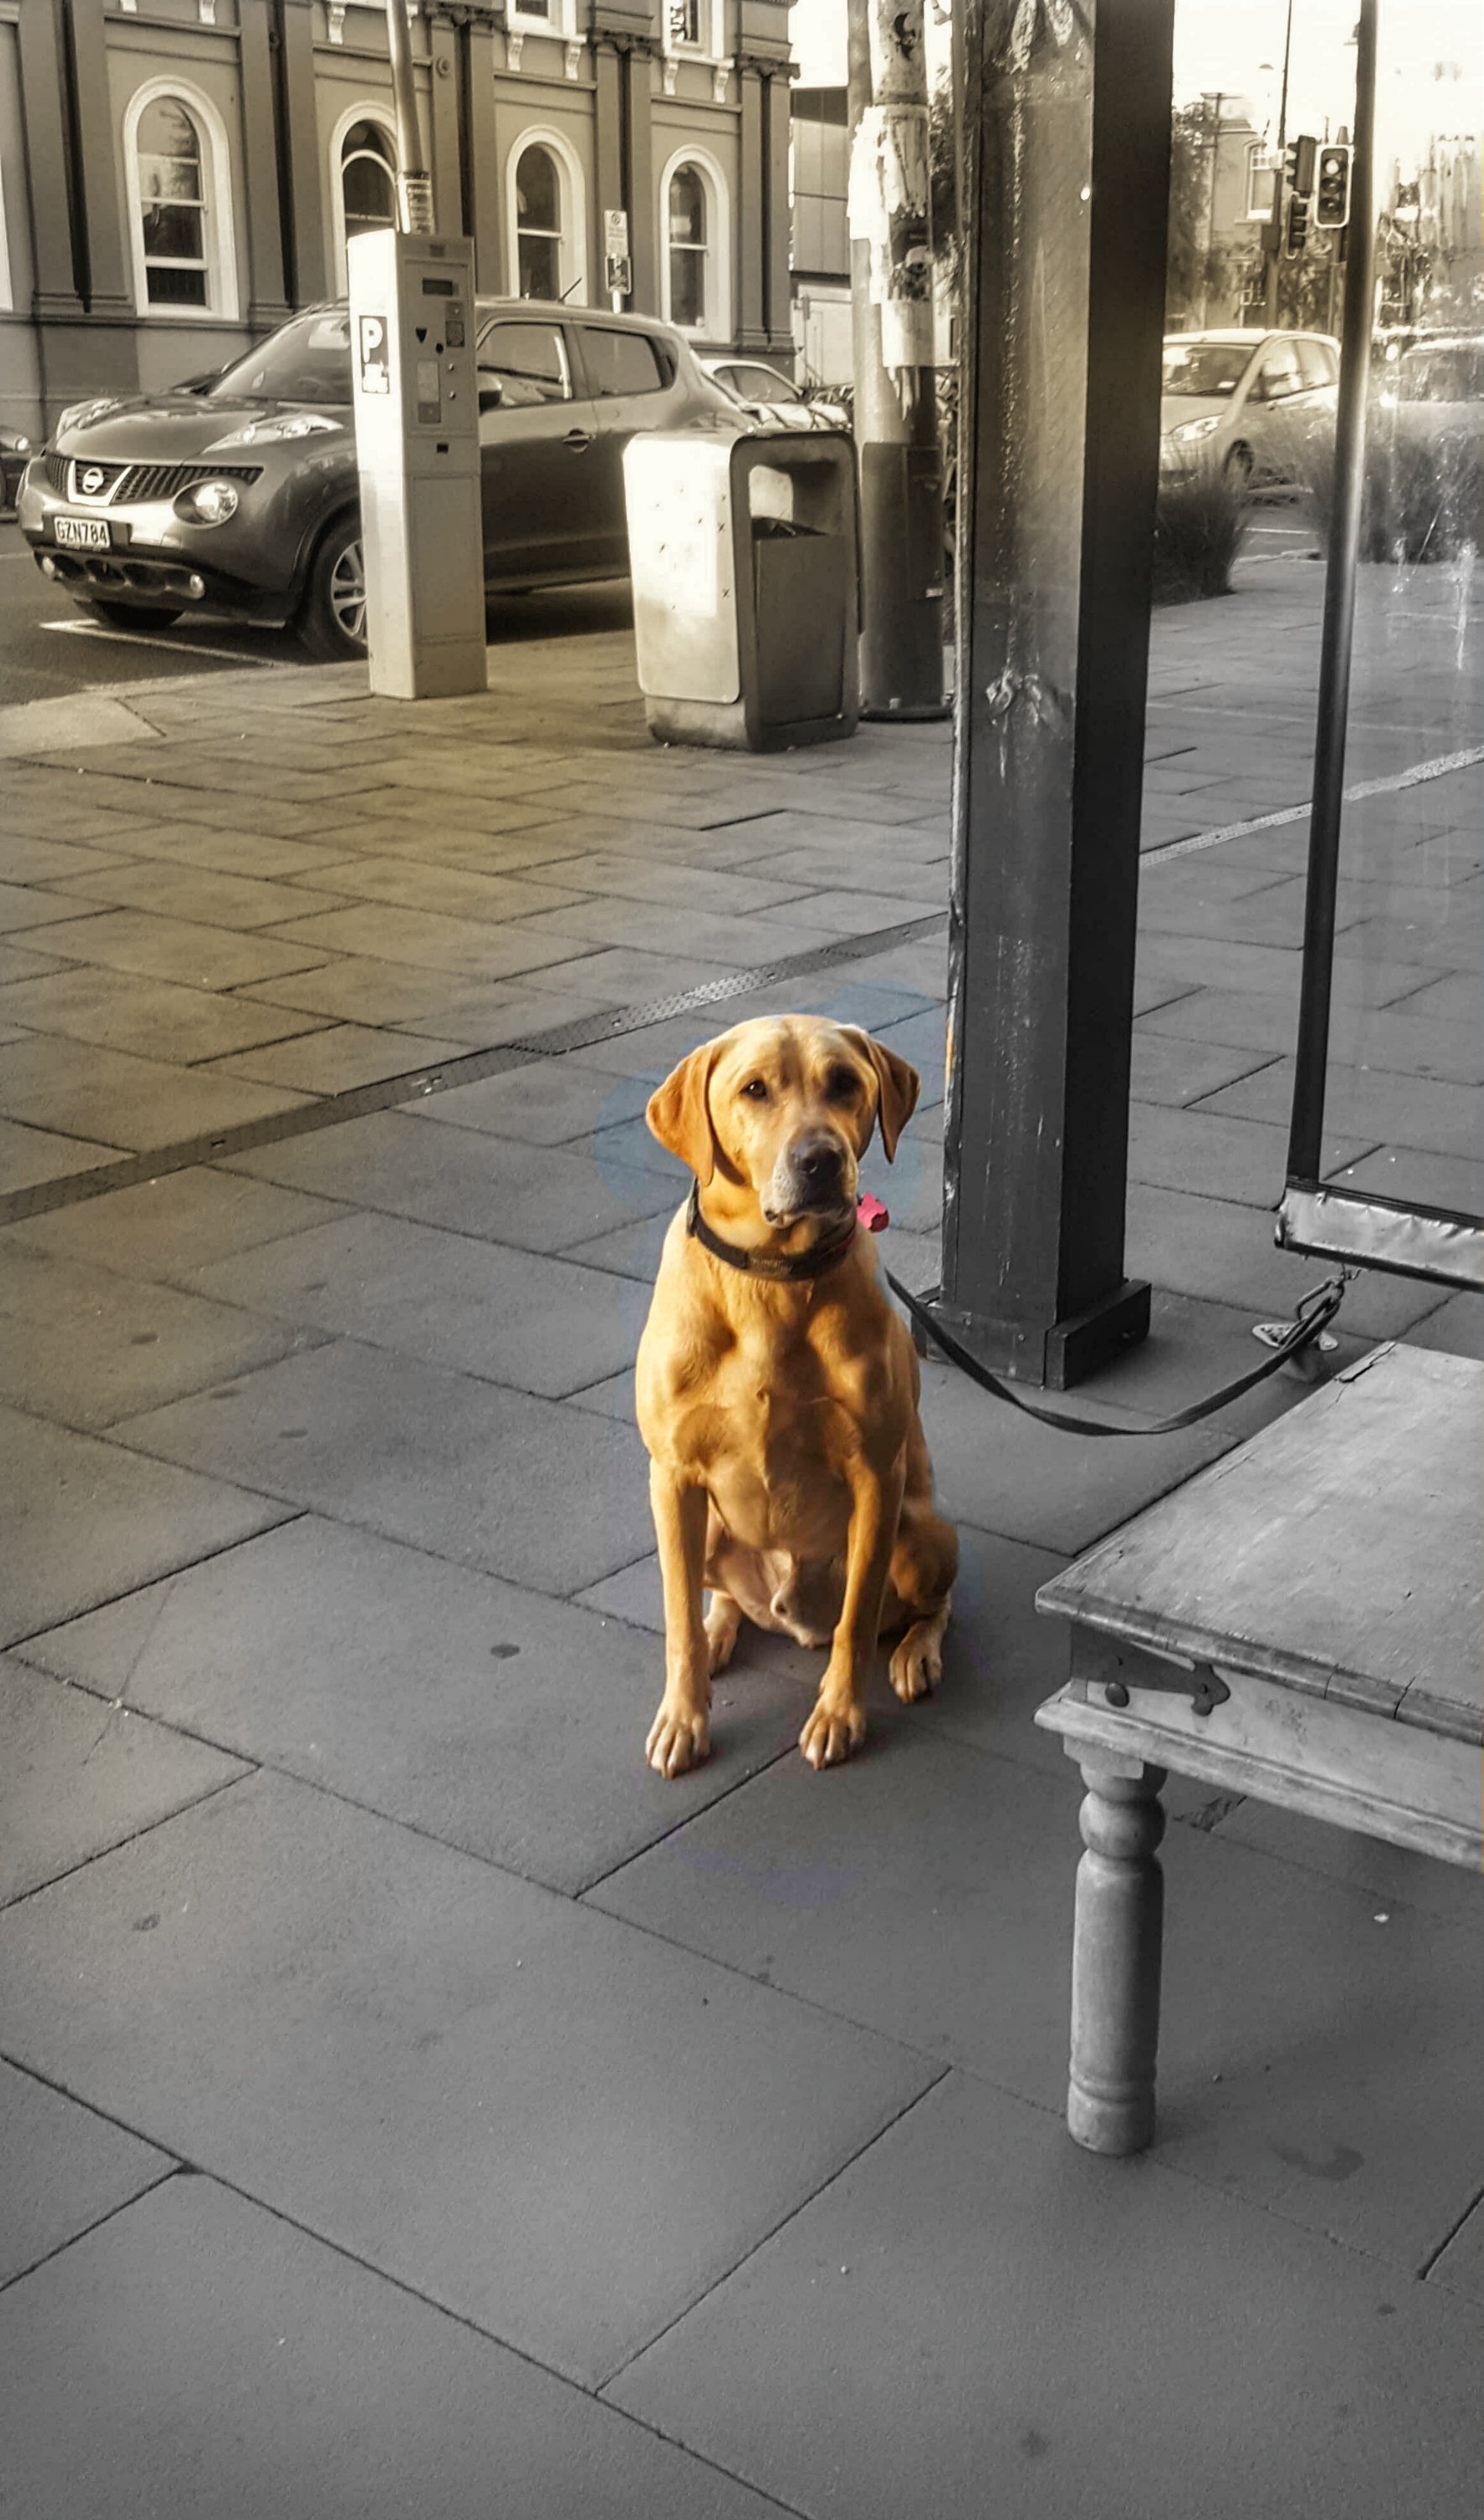 Labrador sitting waiting outside a pub in the street. Tall buildings in the background.